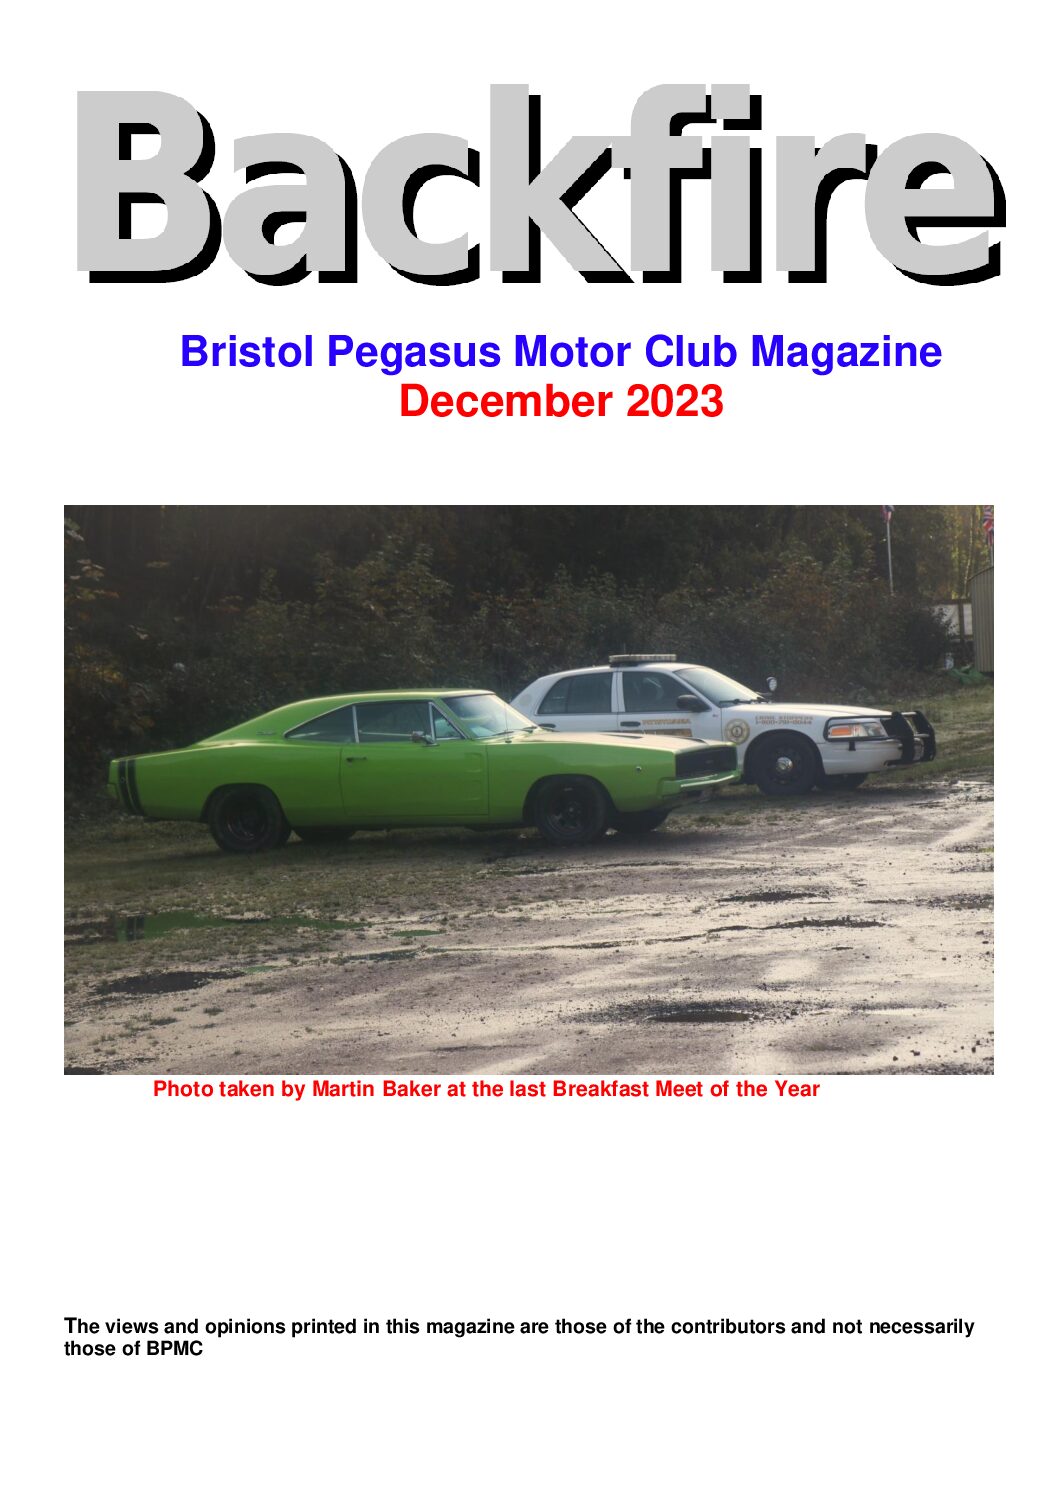 Front cover of December 2023 Issue